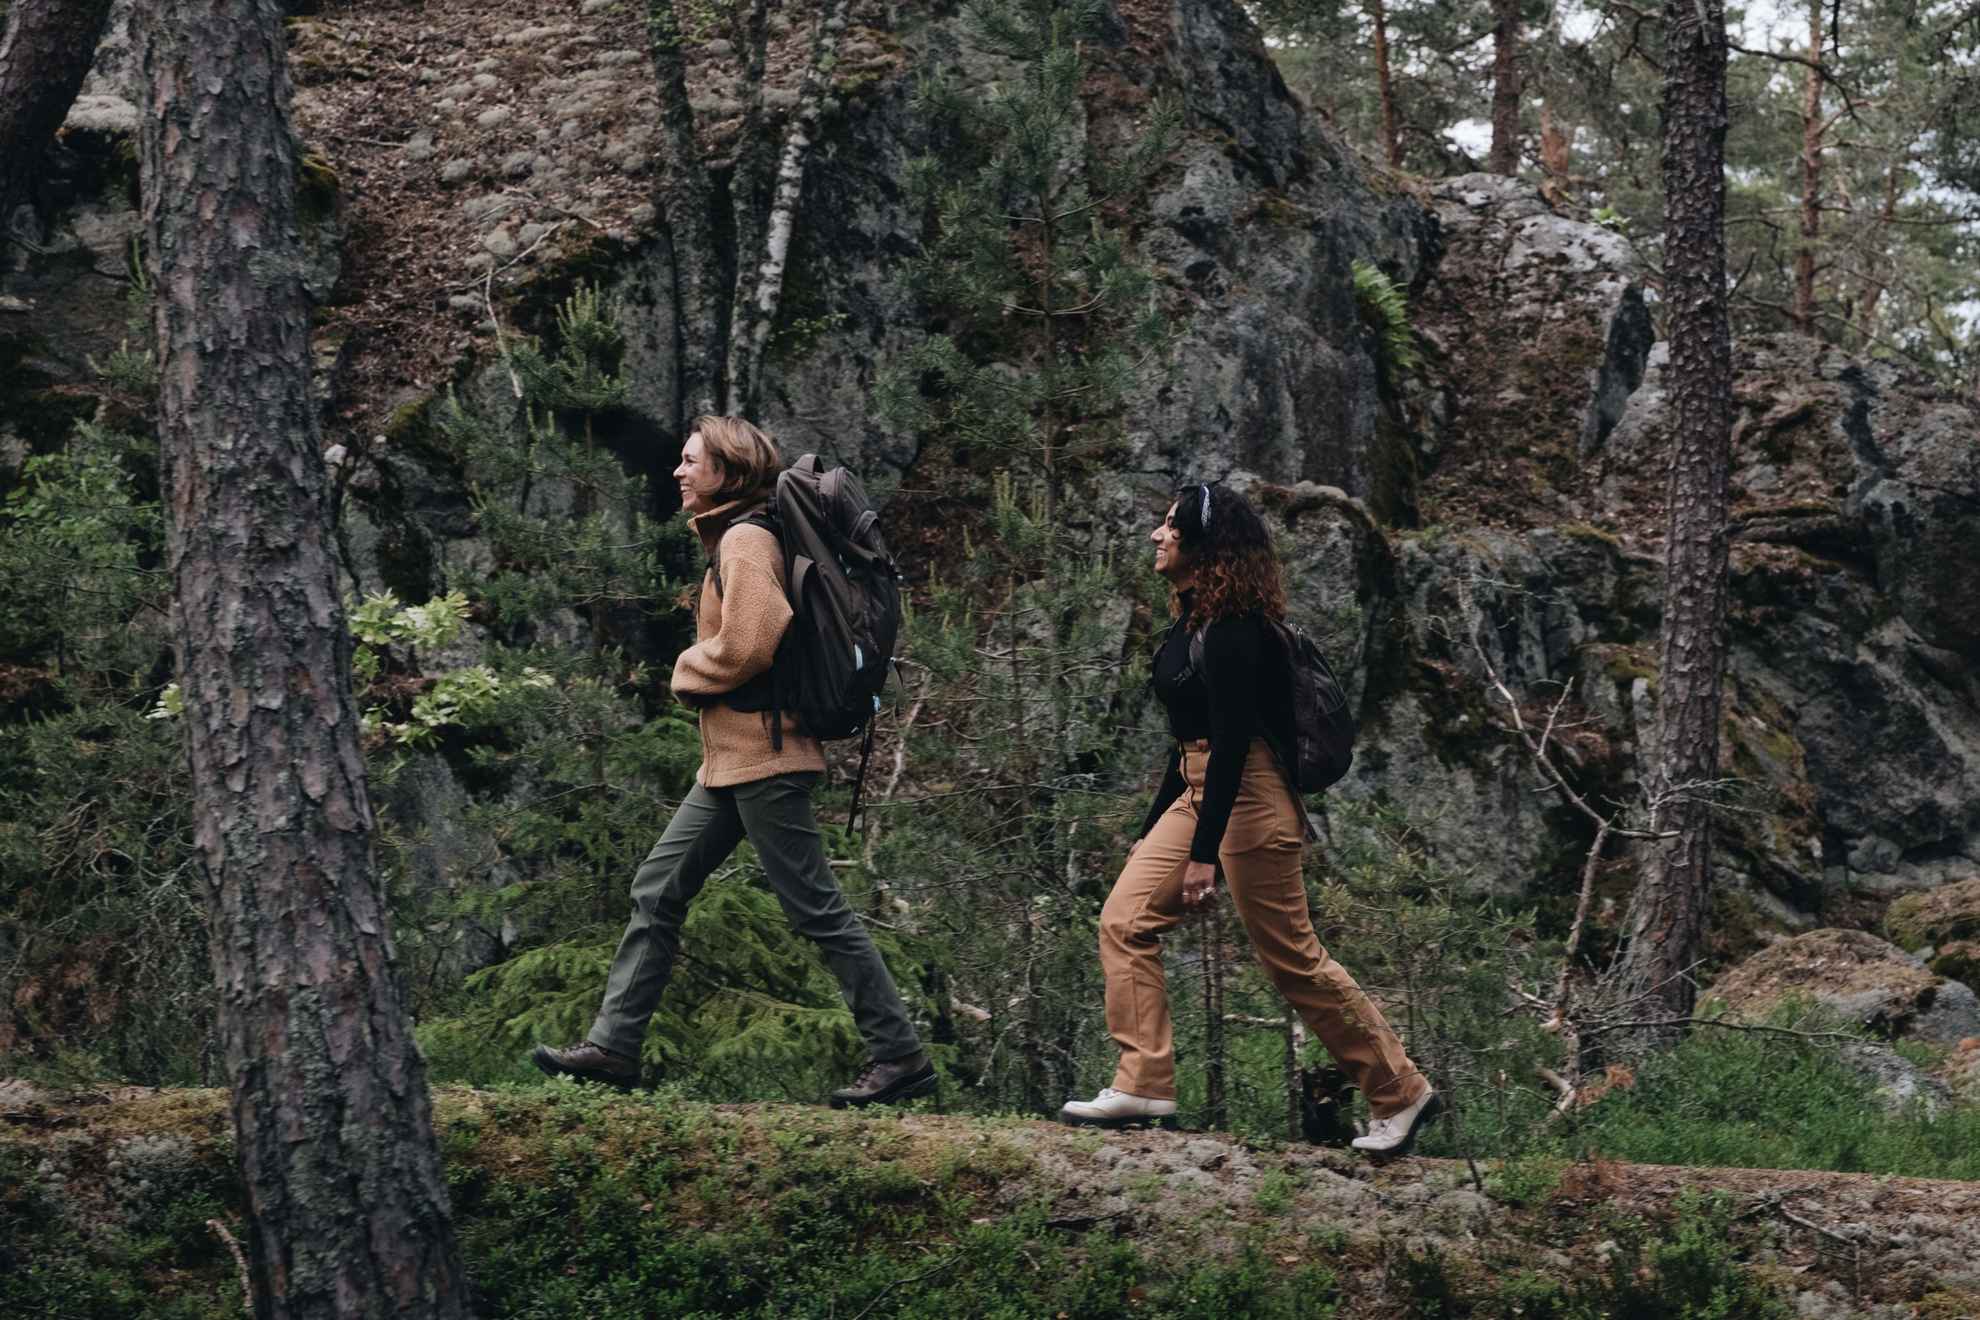 Two women in outdoor clothing hiking in a forest.